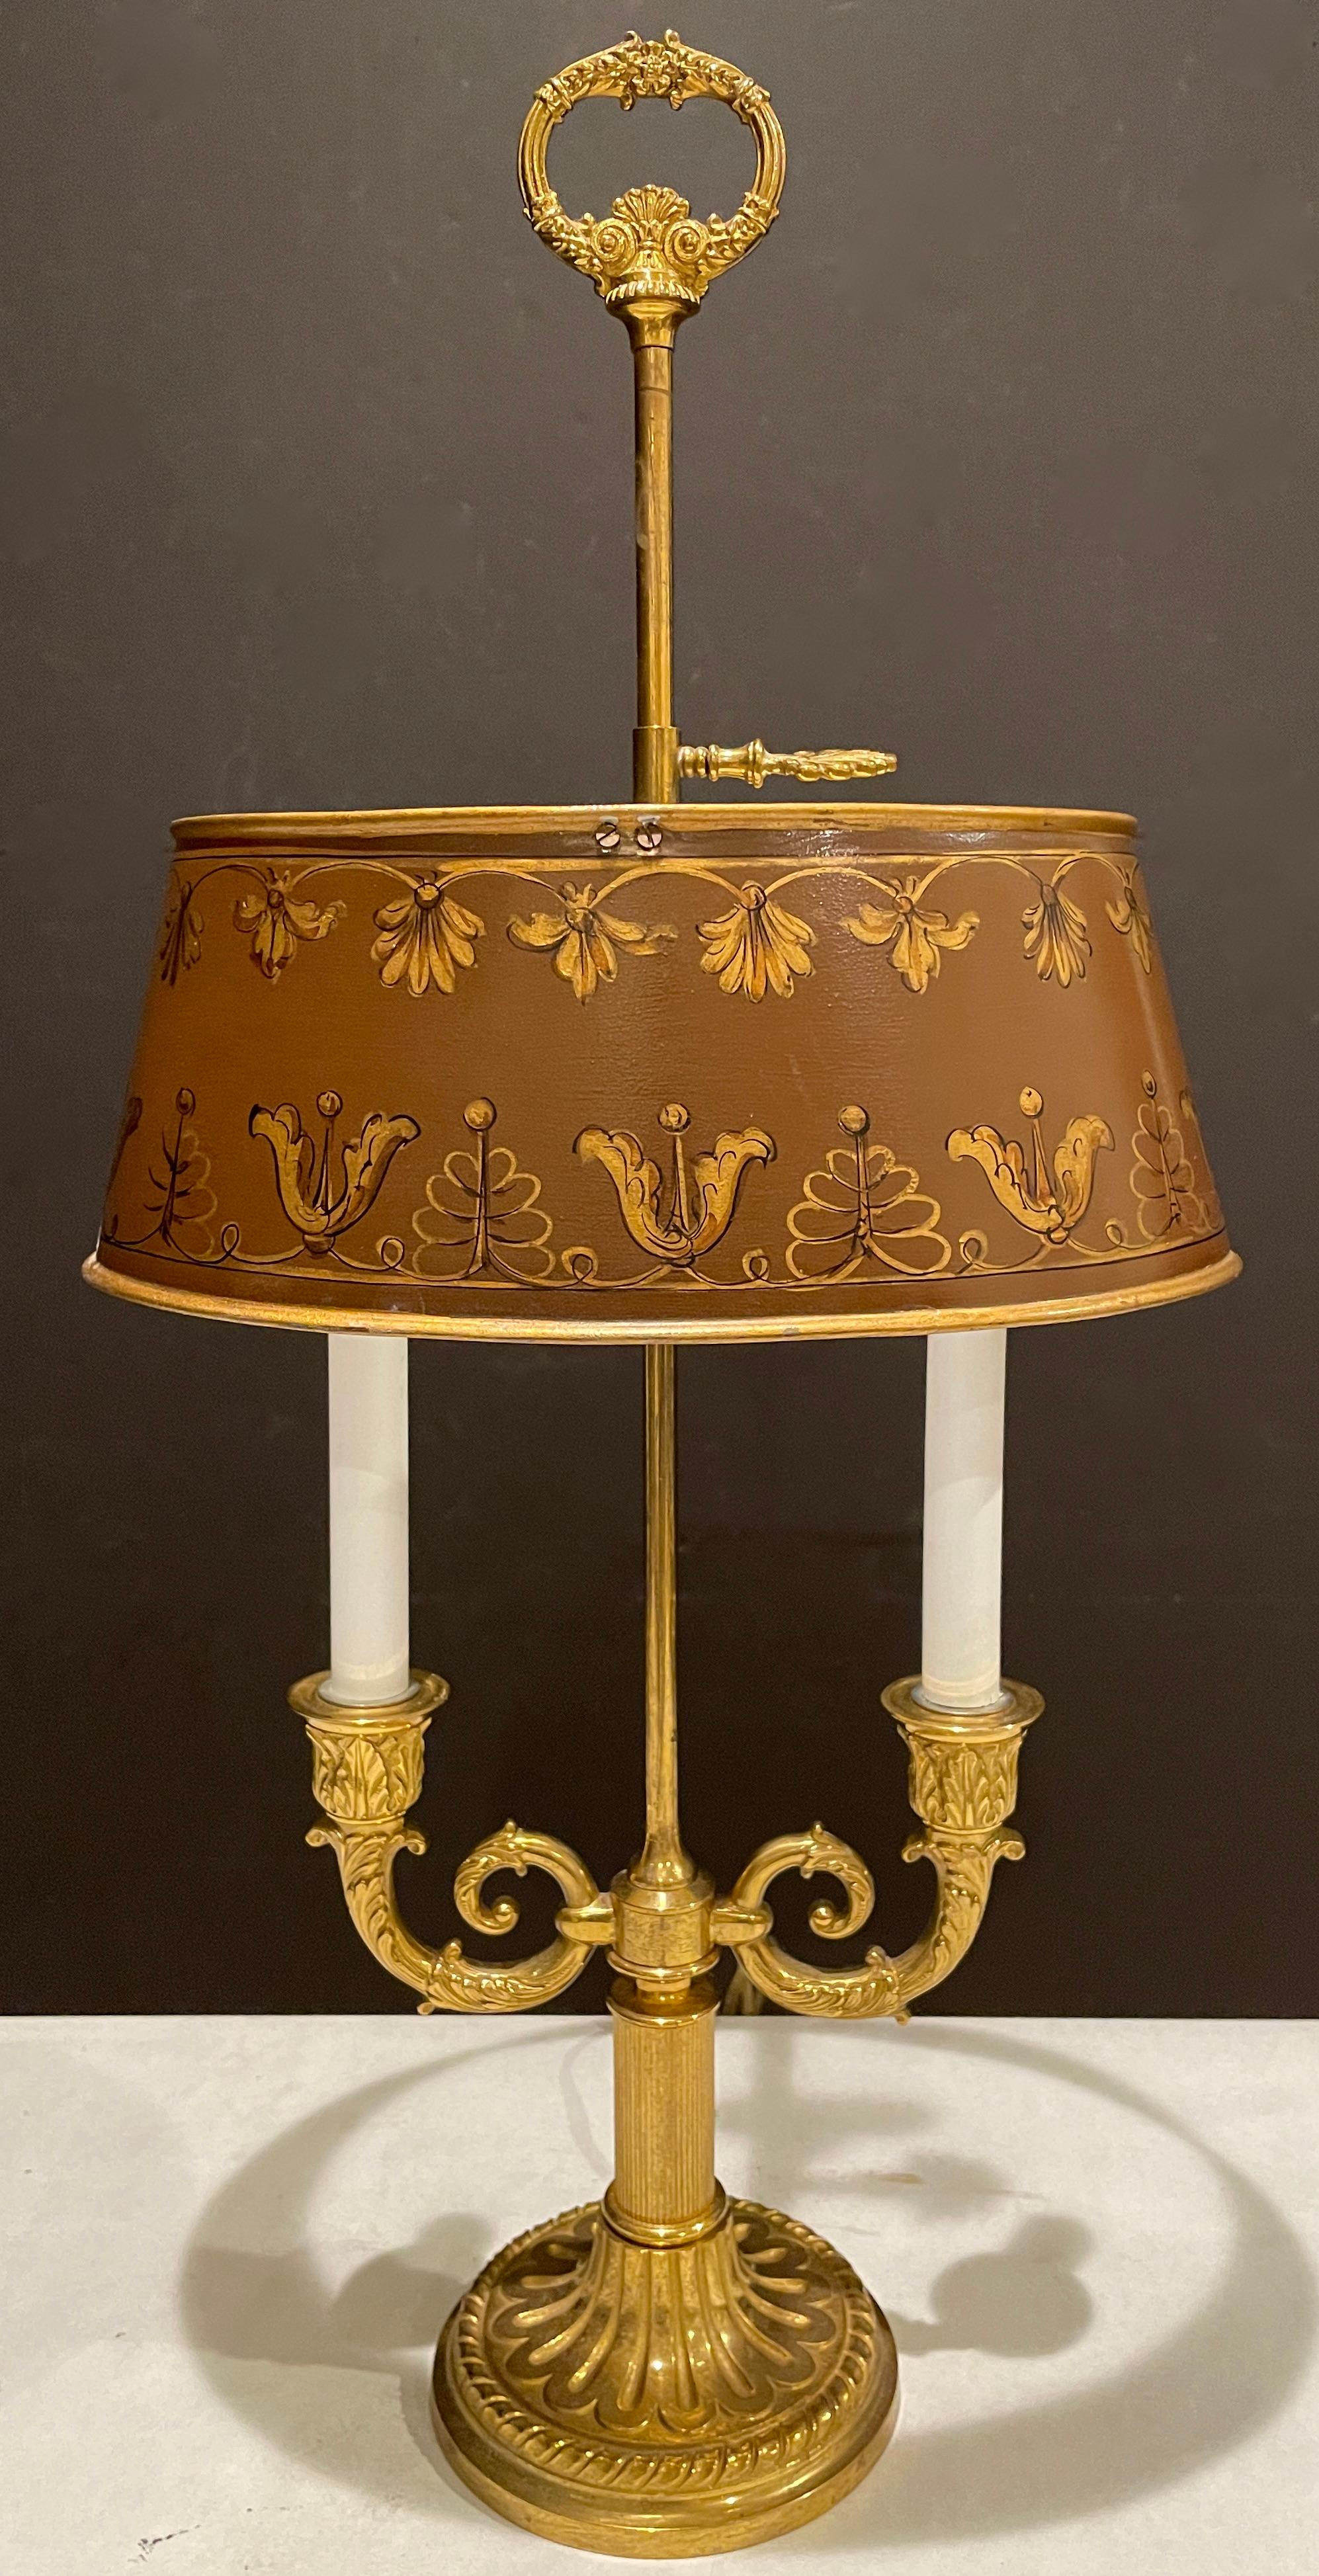 Vintage gilt bronze and tole 2-light bouillotte lamp. Round bronze base and oval gilt and painted tole adjustable shade with two arm candle lights and wreath finial.